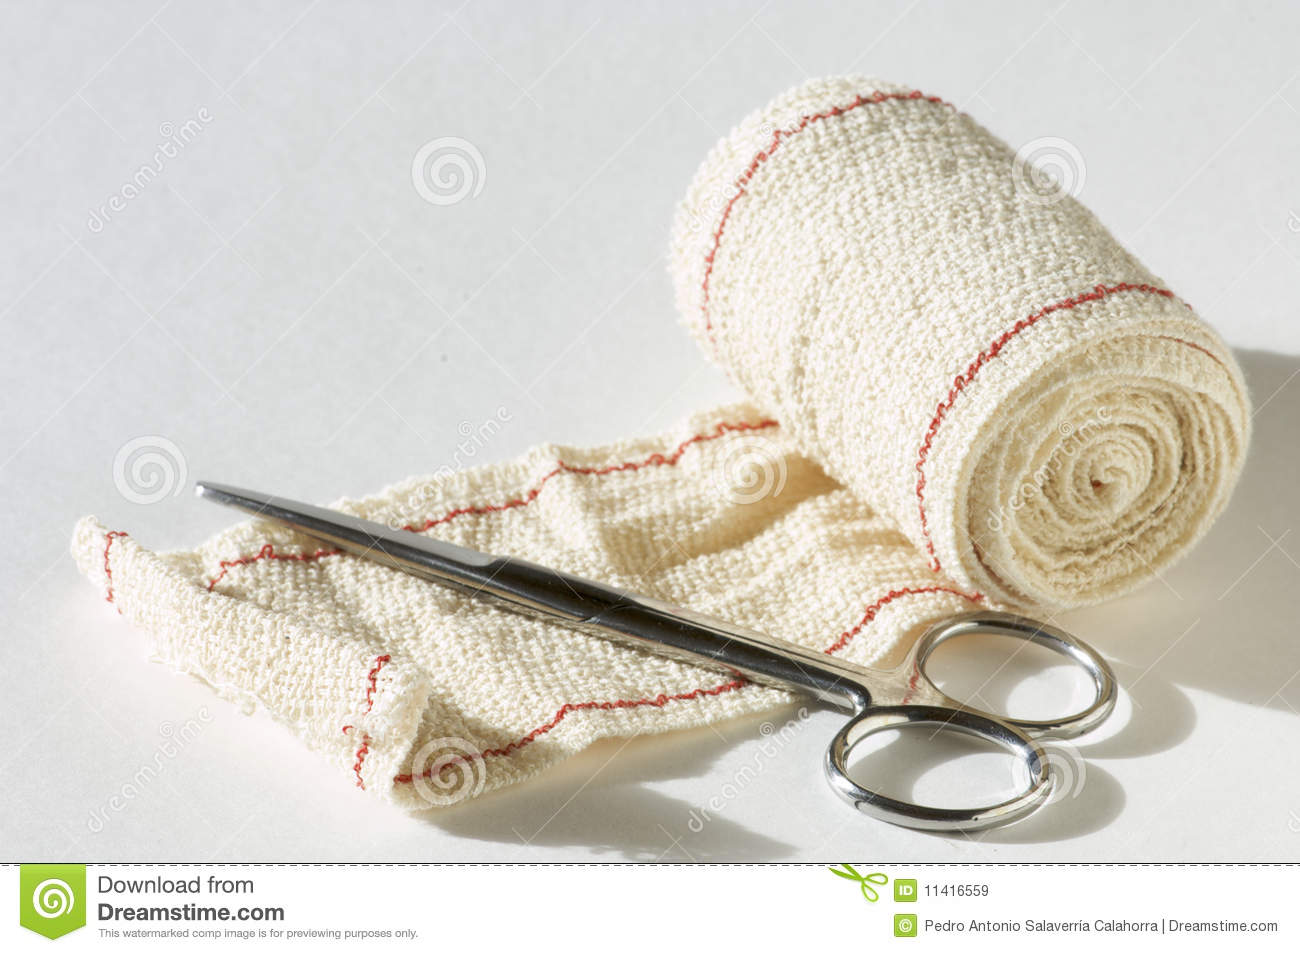 Medical Scissors And Bandages With White Background